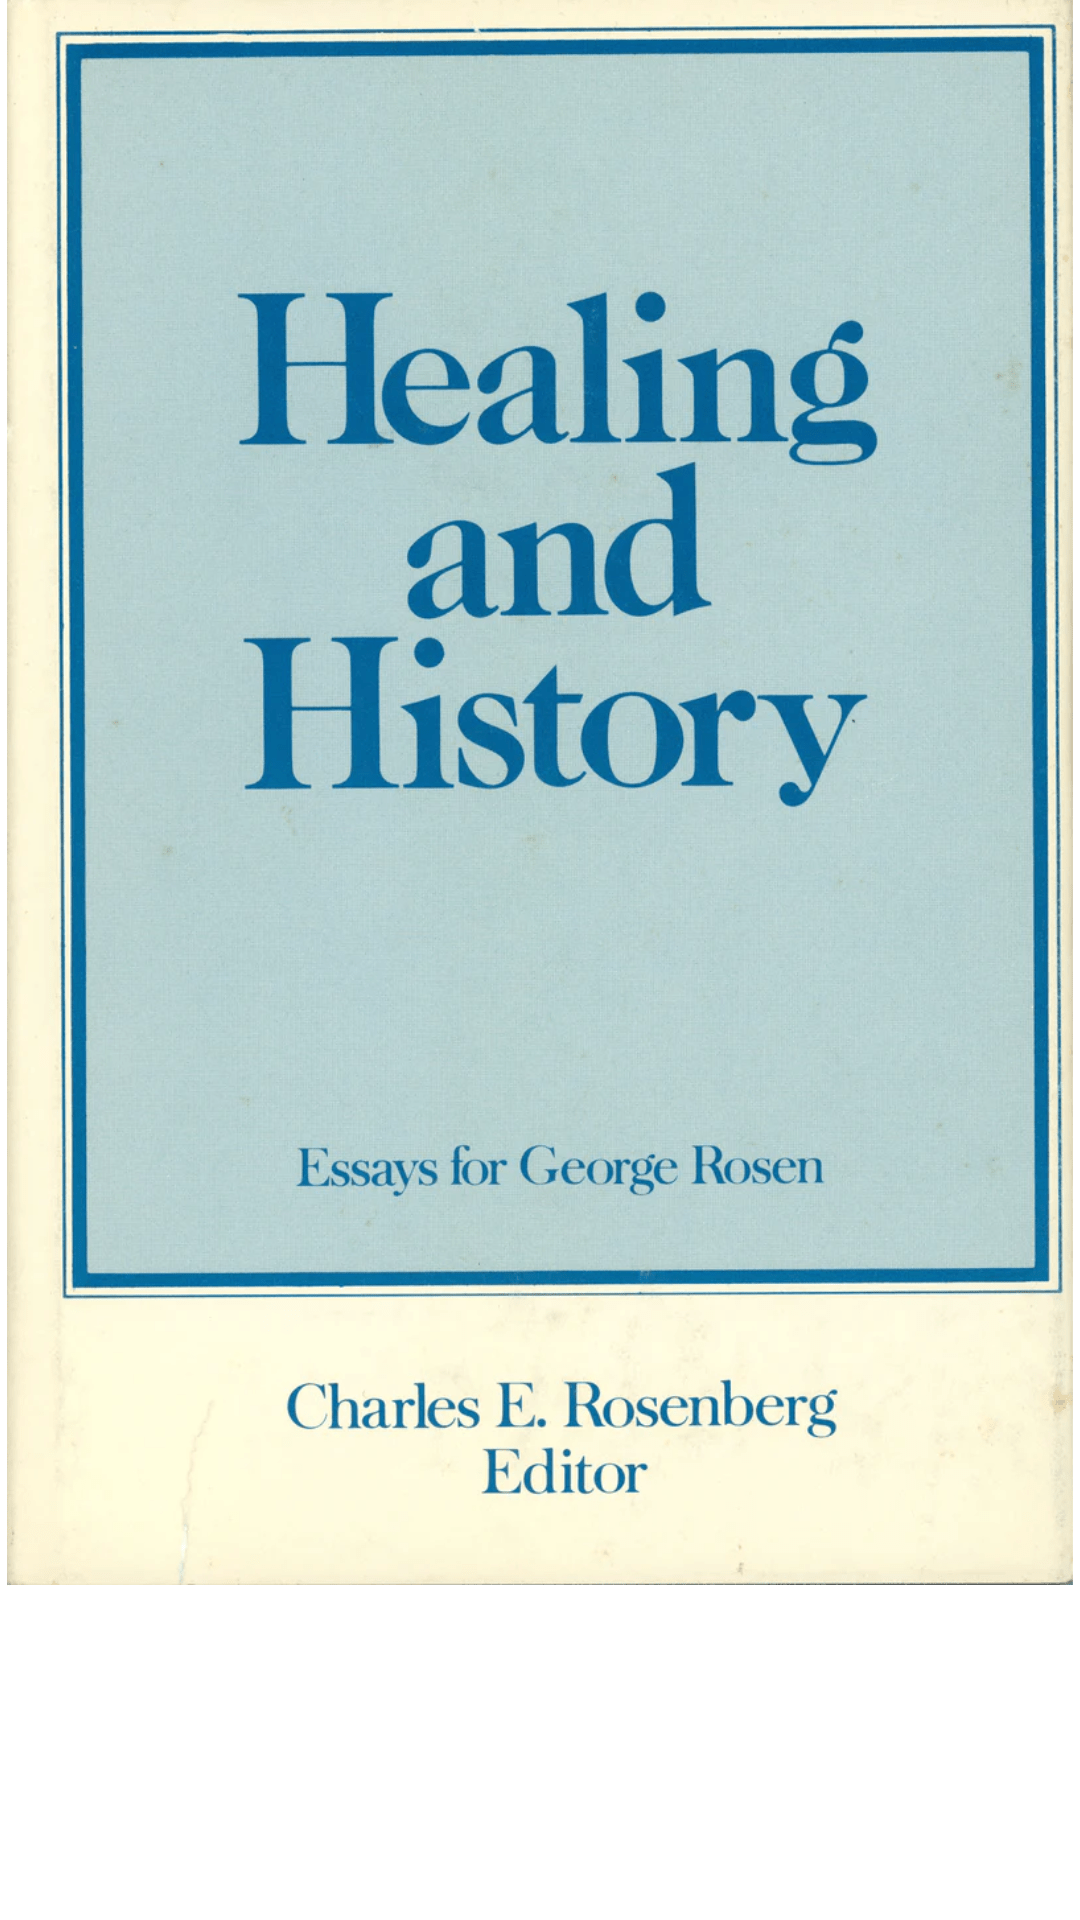 Healing and history: Essays for George Rosen